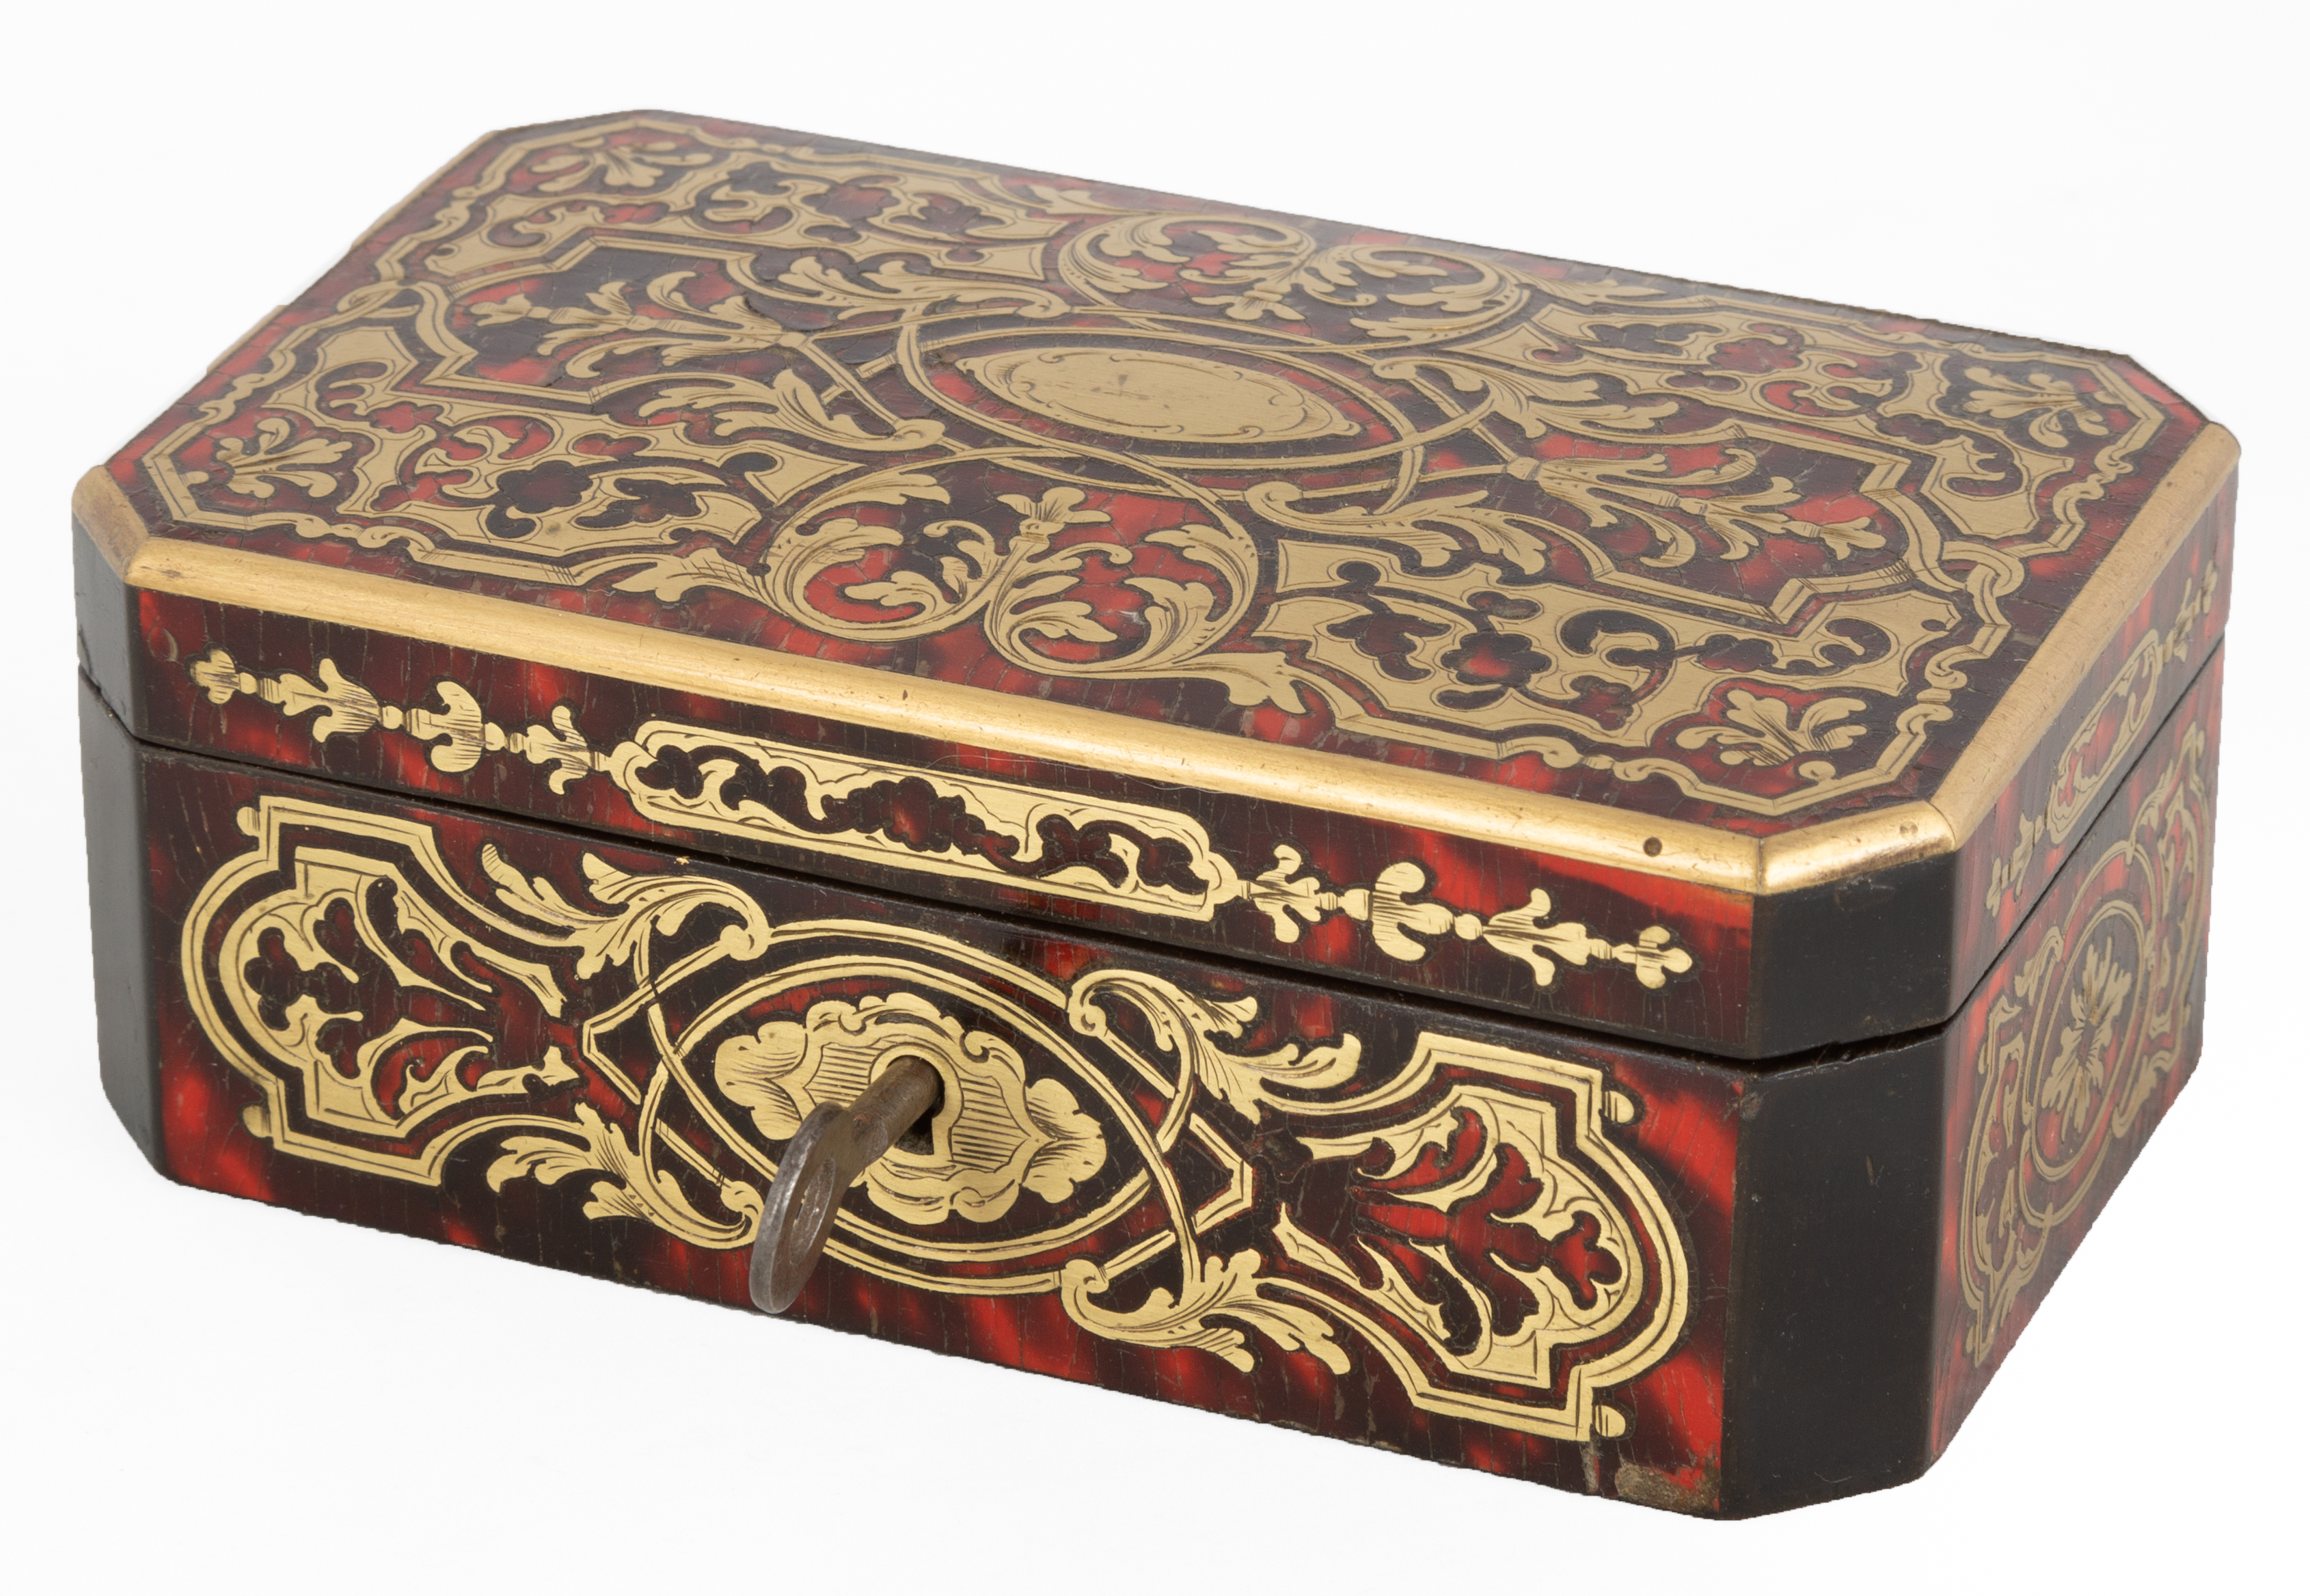 BOULLE INLAID BOX France, 19th century.